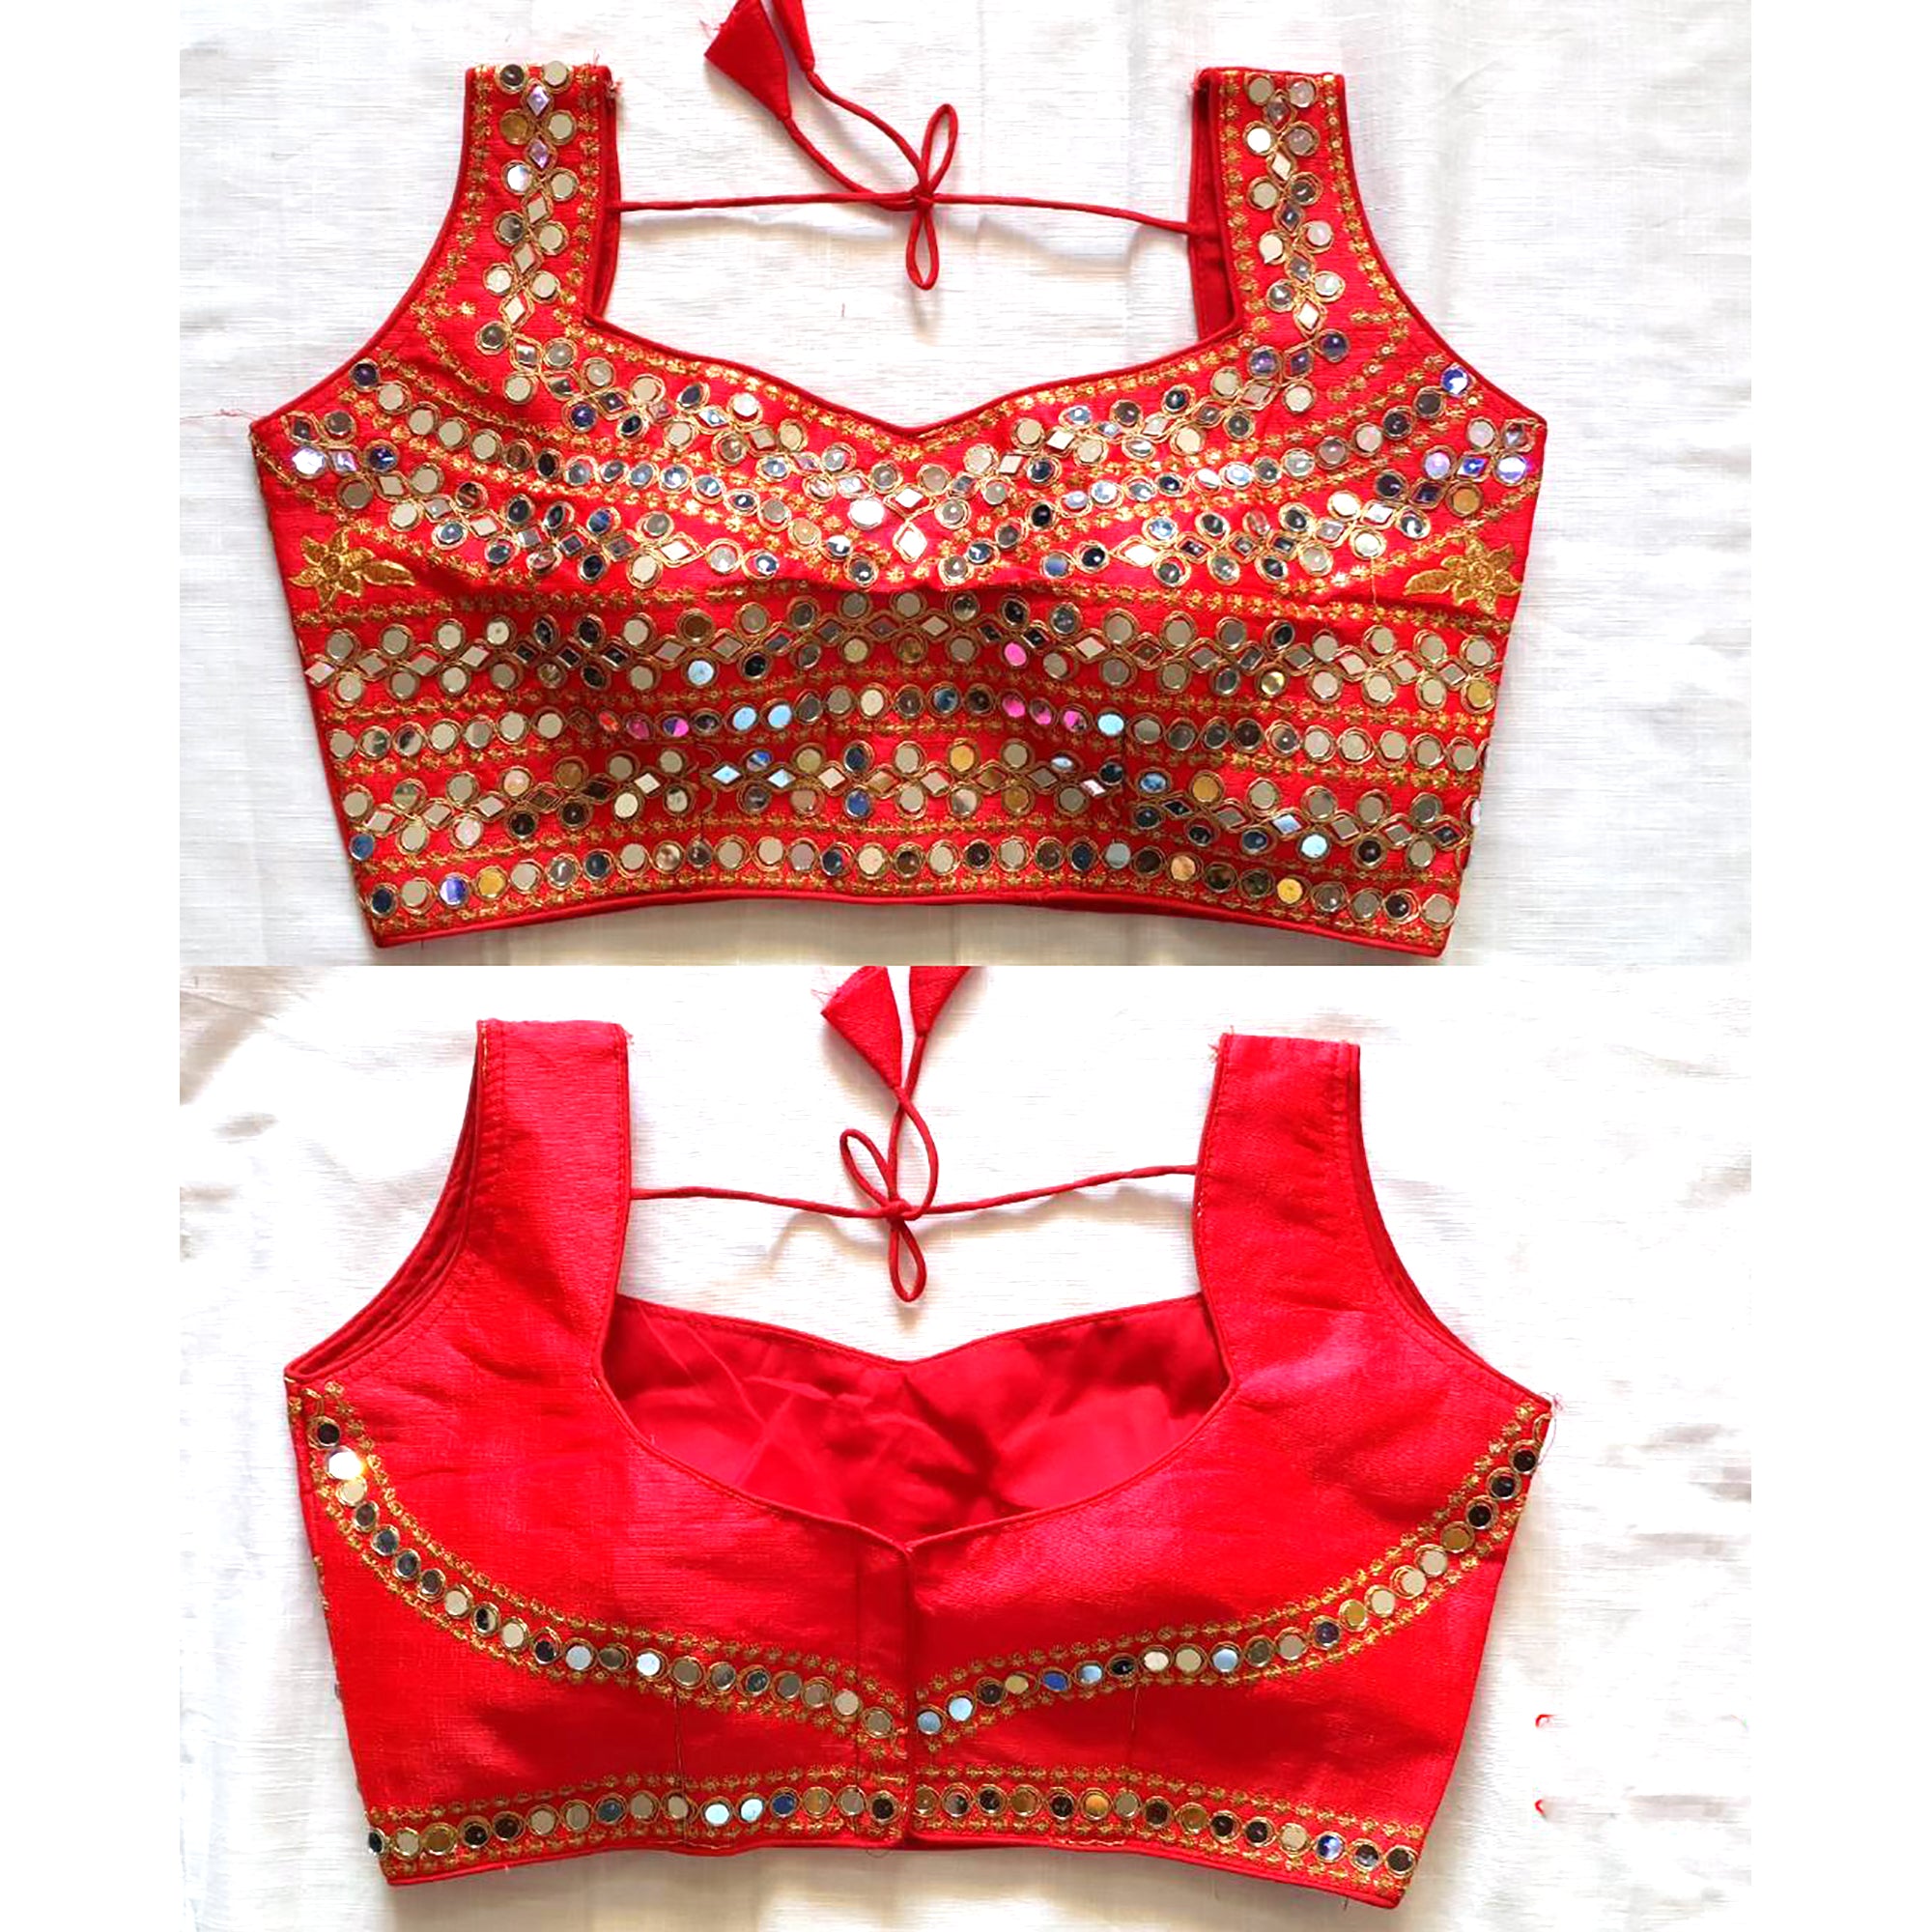 Mirrored Choli Blouse-7 Colors - Vintage India NYC